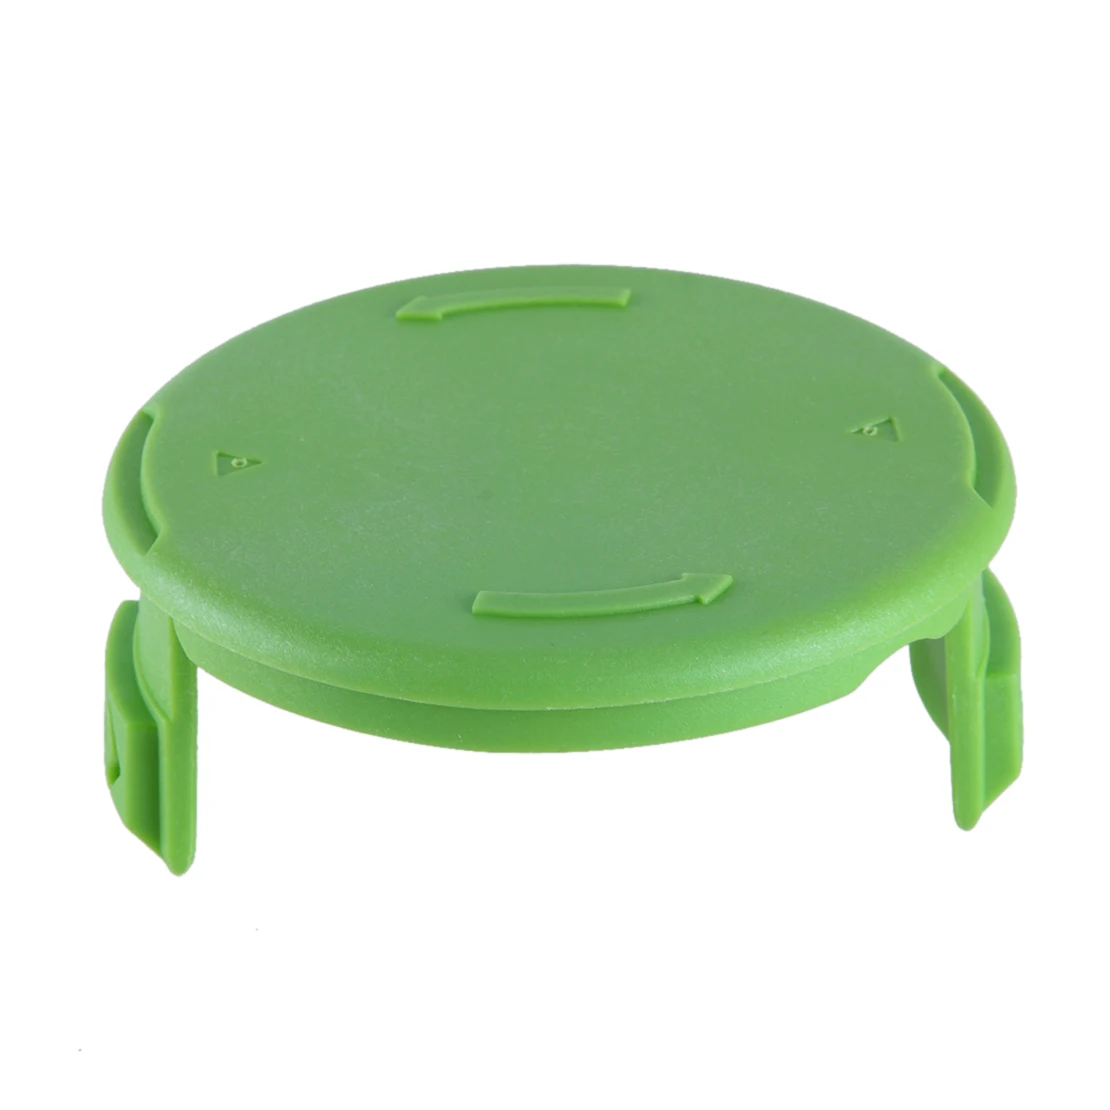 GreenWorks 1x Grass Cutter Trimmer Spools Coil Cover Cap Fit For Greenworks 21332 21602 